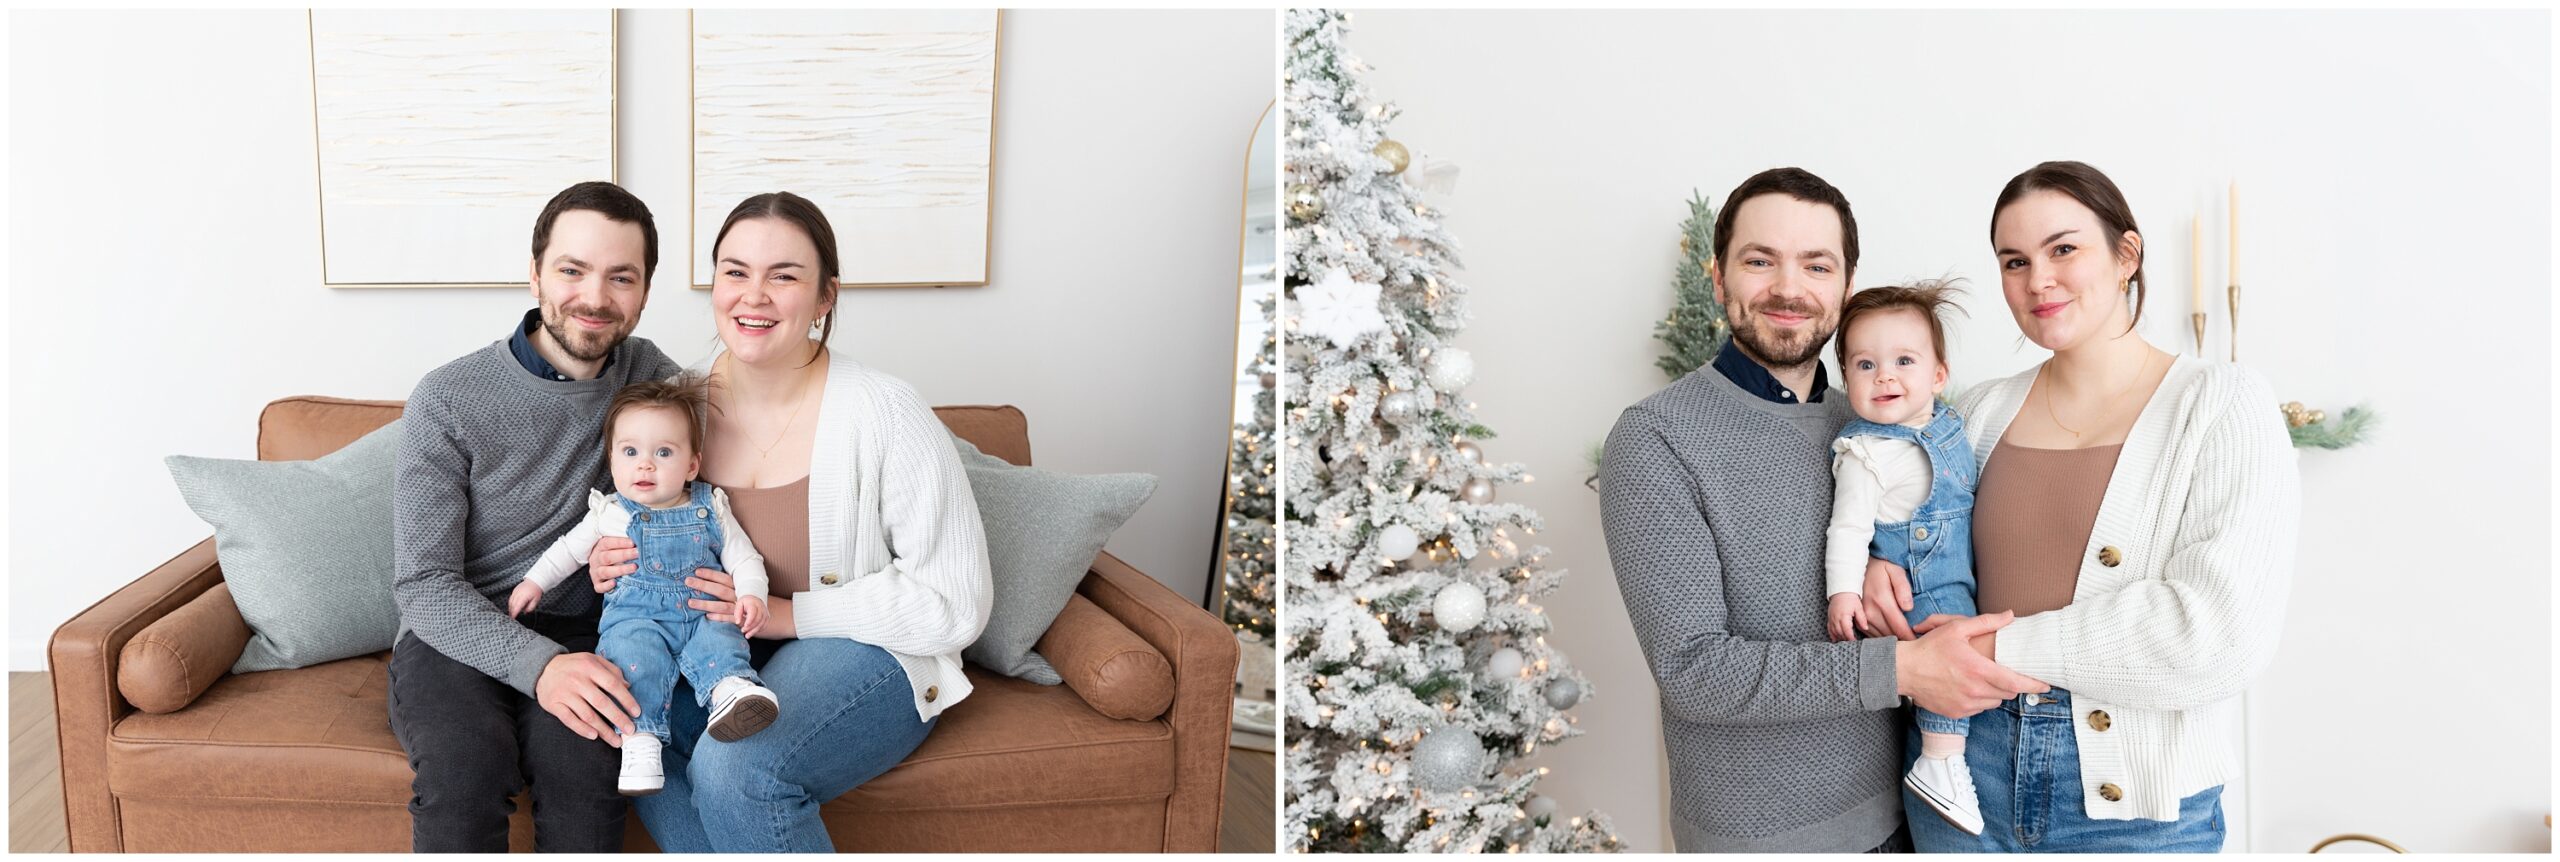 Pittsburgh Studio Holiday Mini Session, a Family Portrait Session photographed by Pittsburgh Family Photographer, Acevedo Weddings